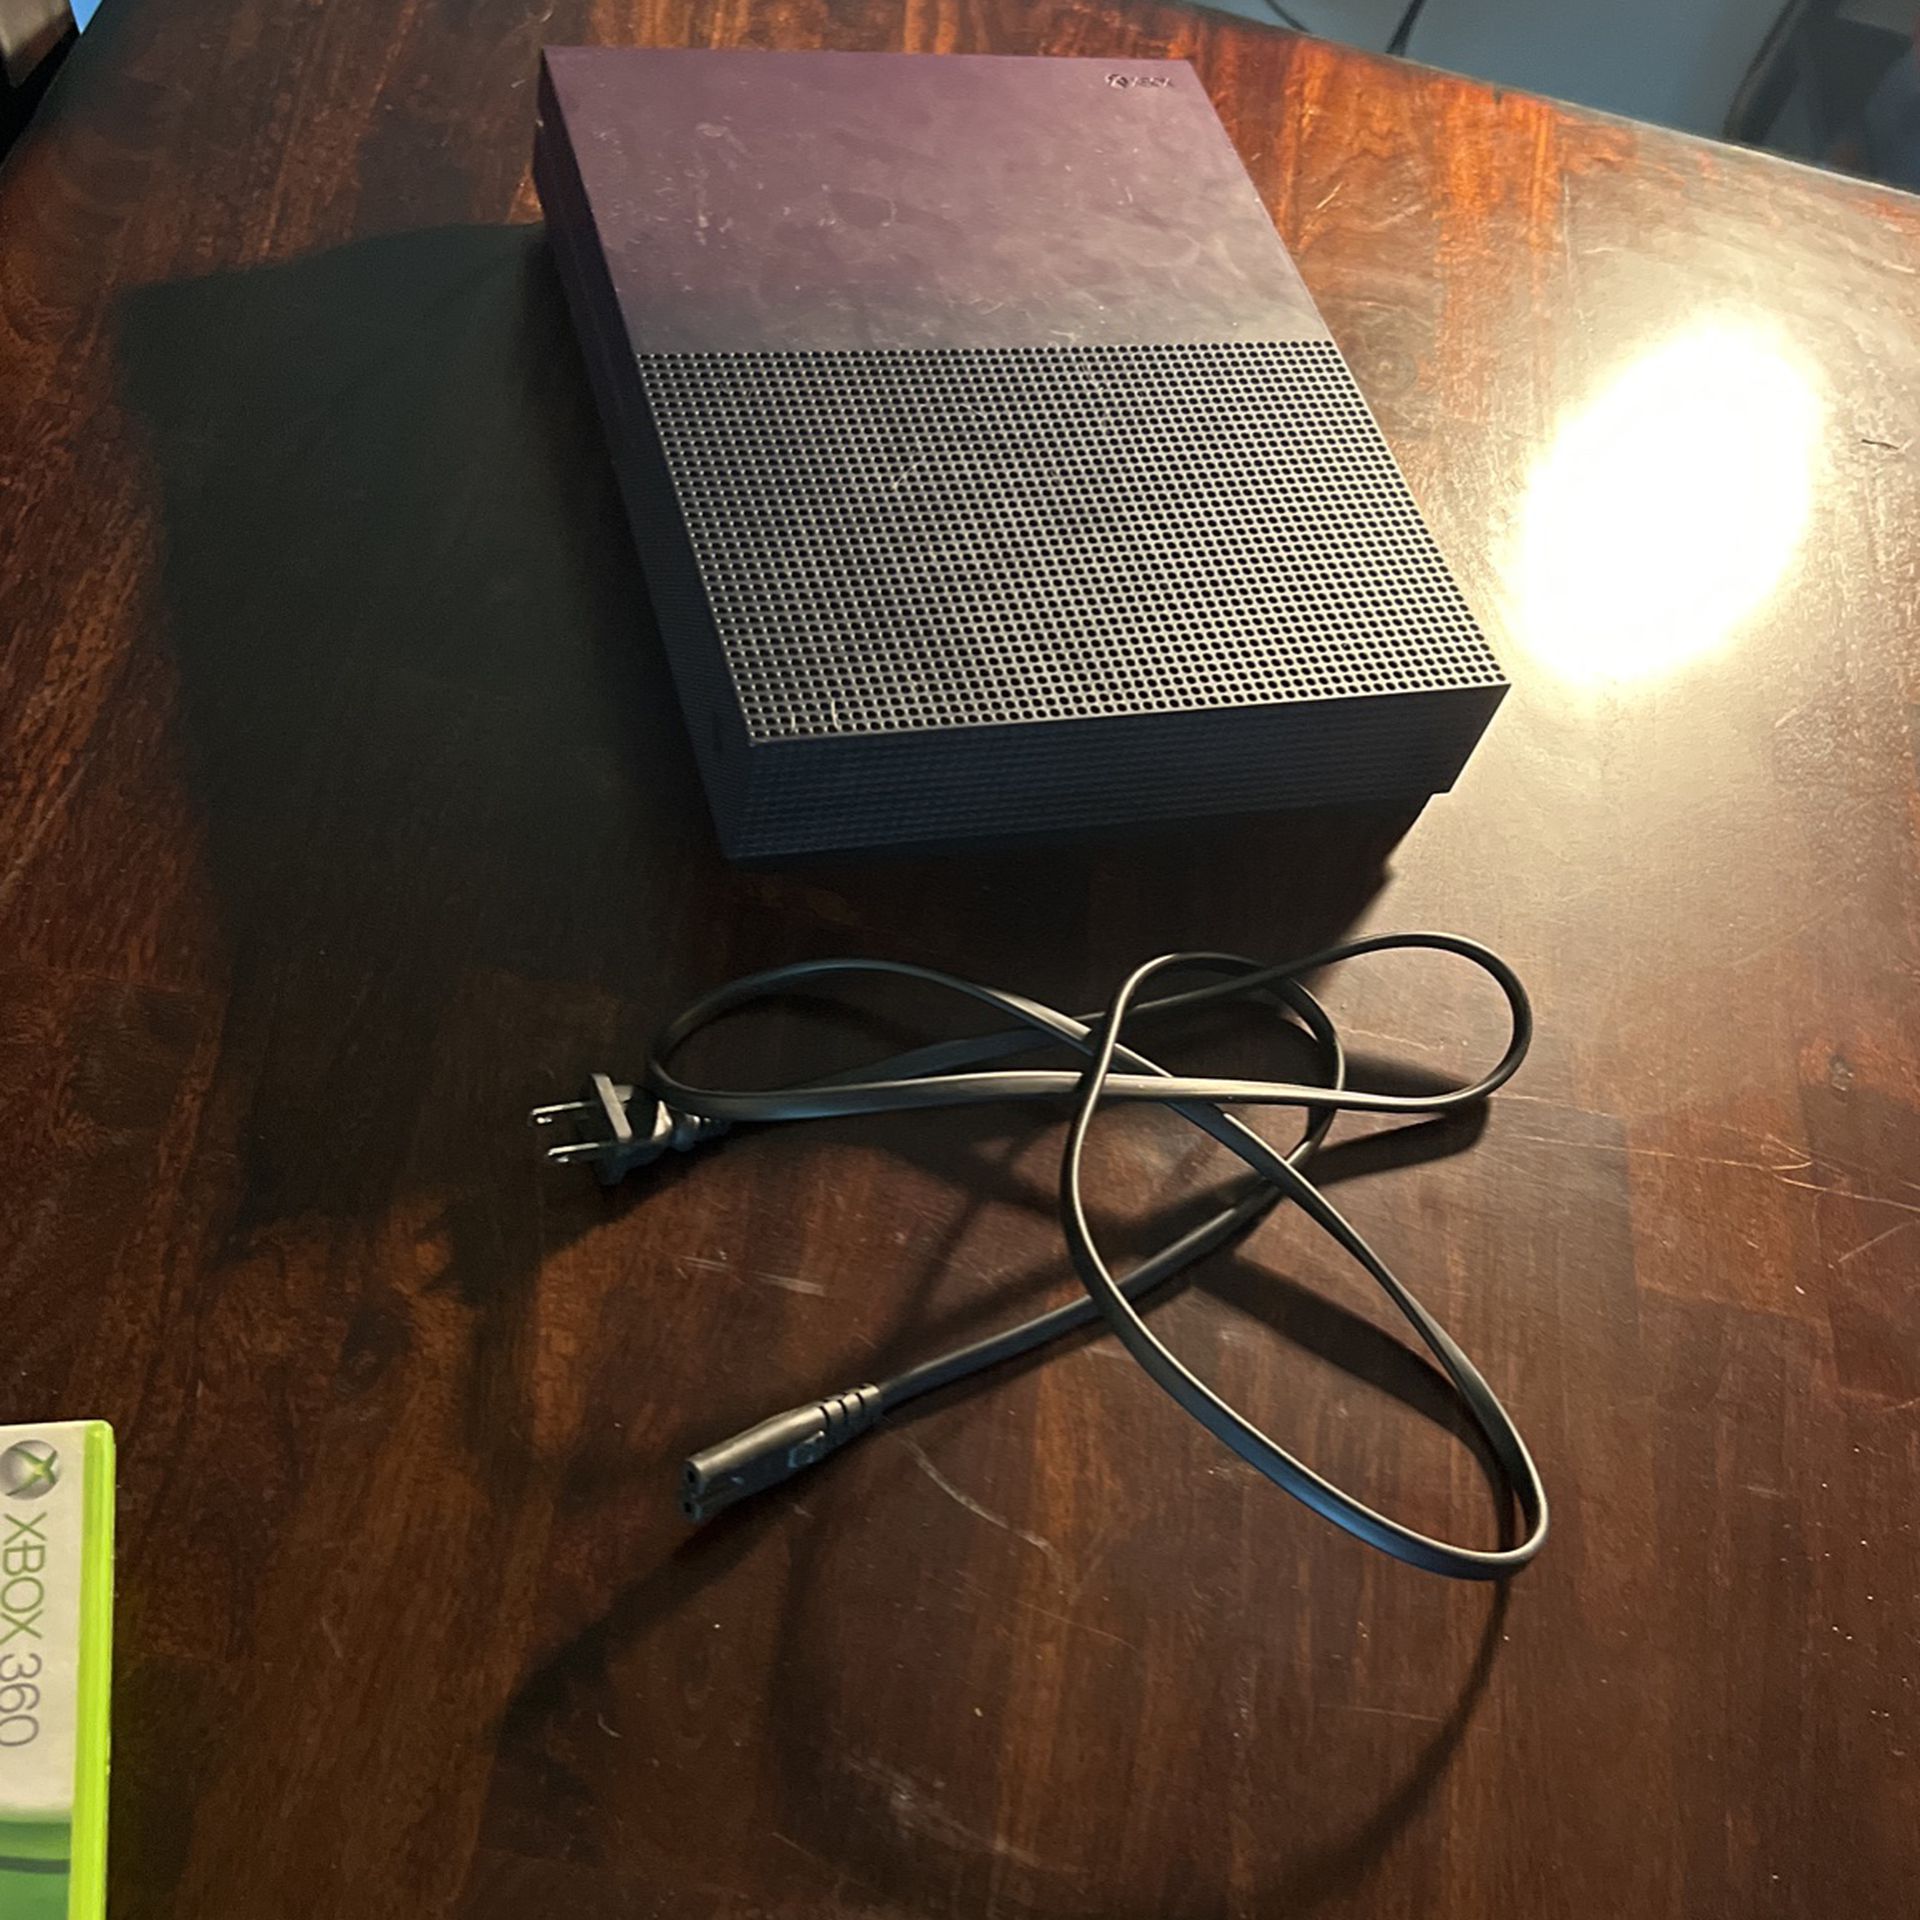 Limited Edition Fortnite Xbox 1 With Power Cable And 3 Xbox 360 Games